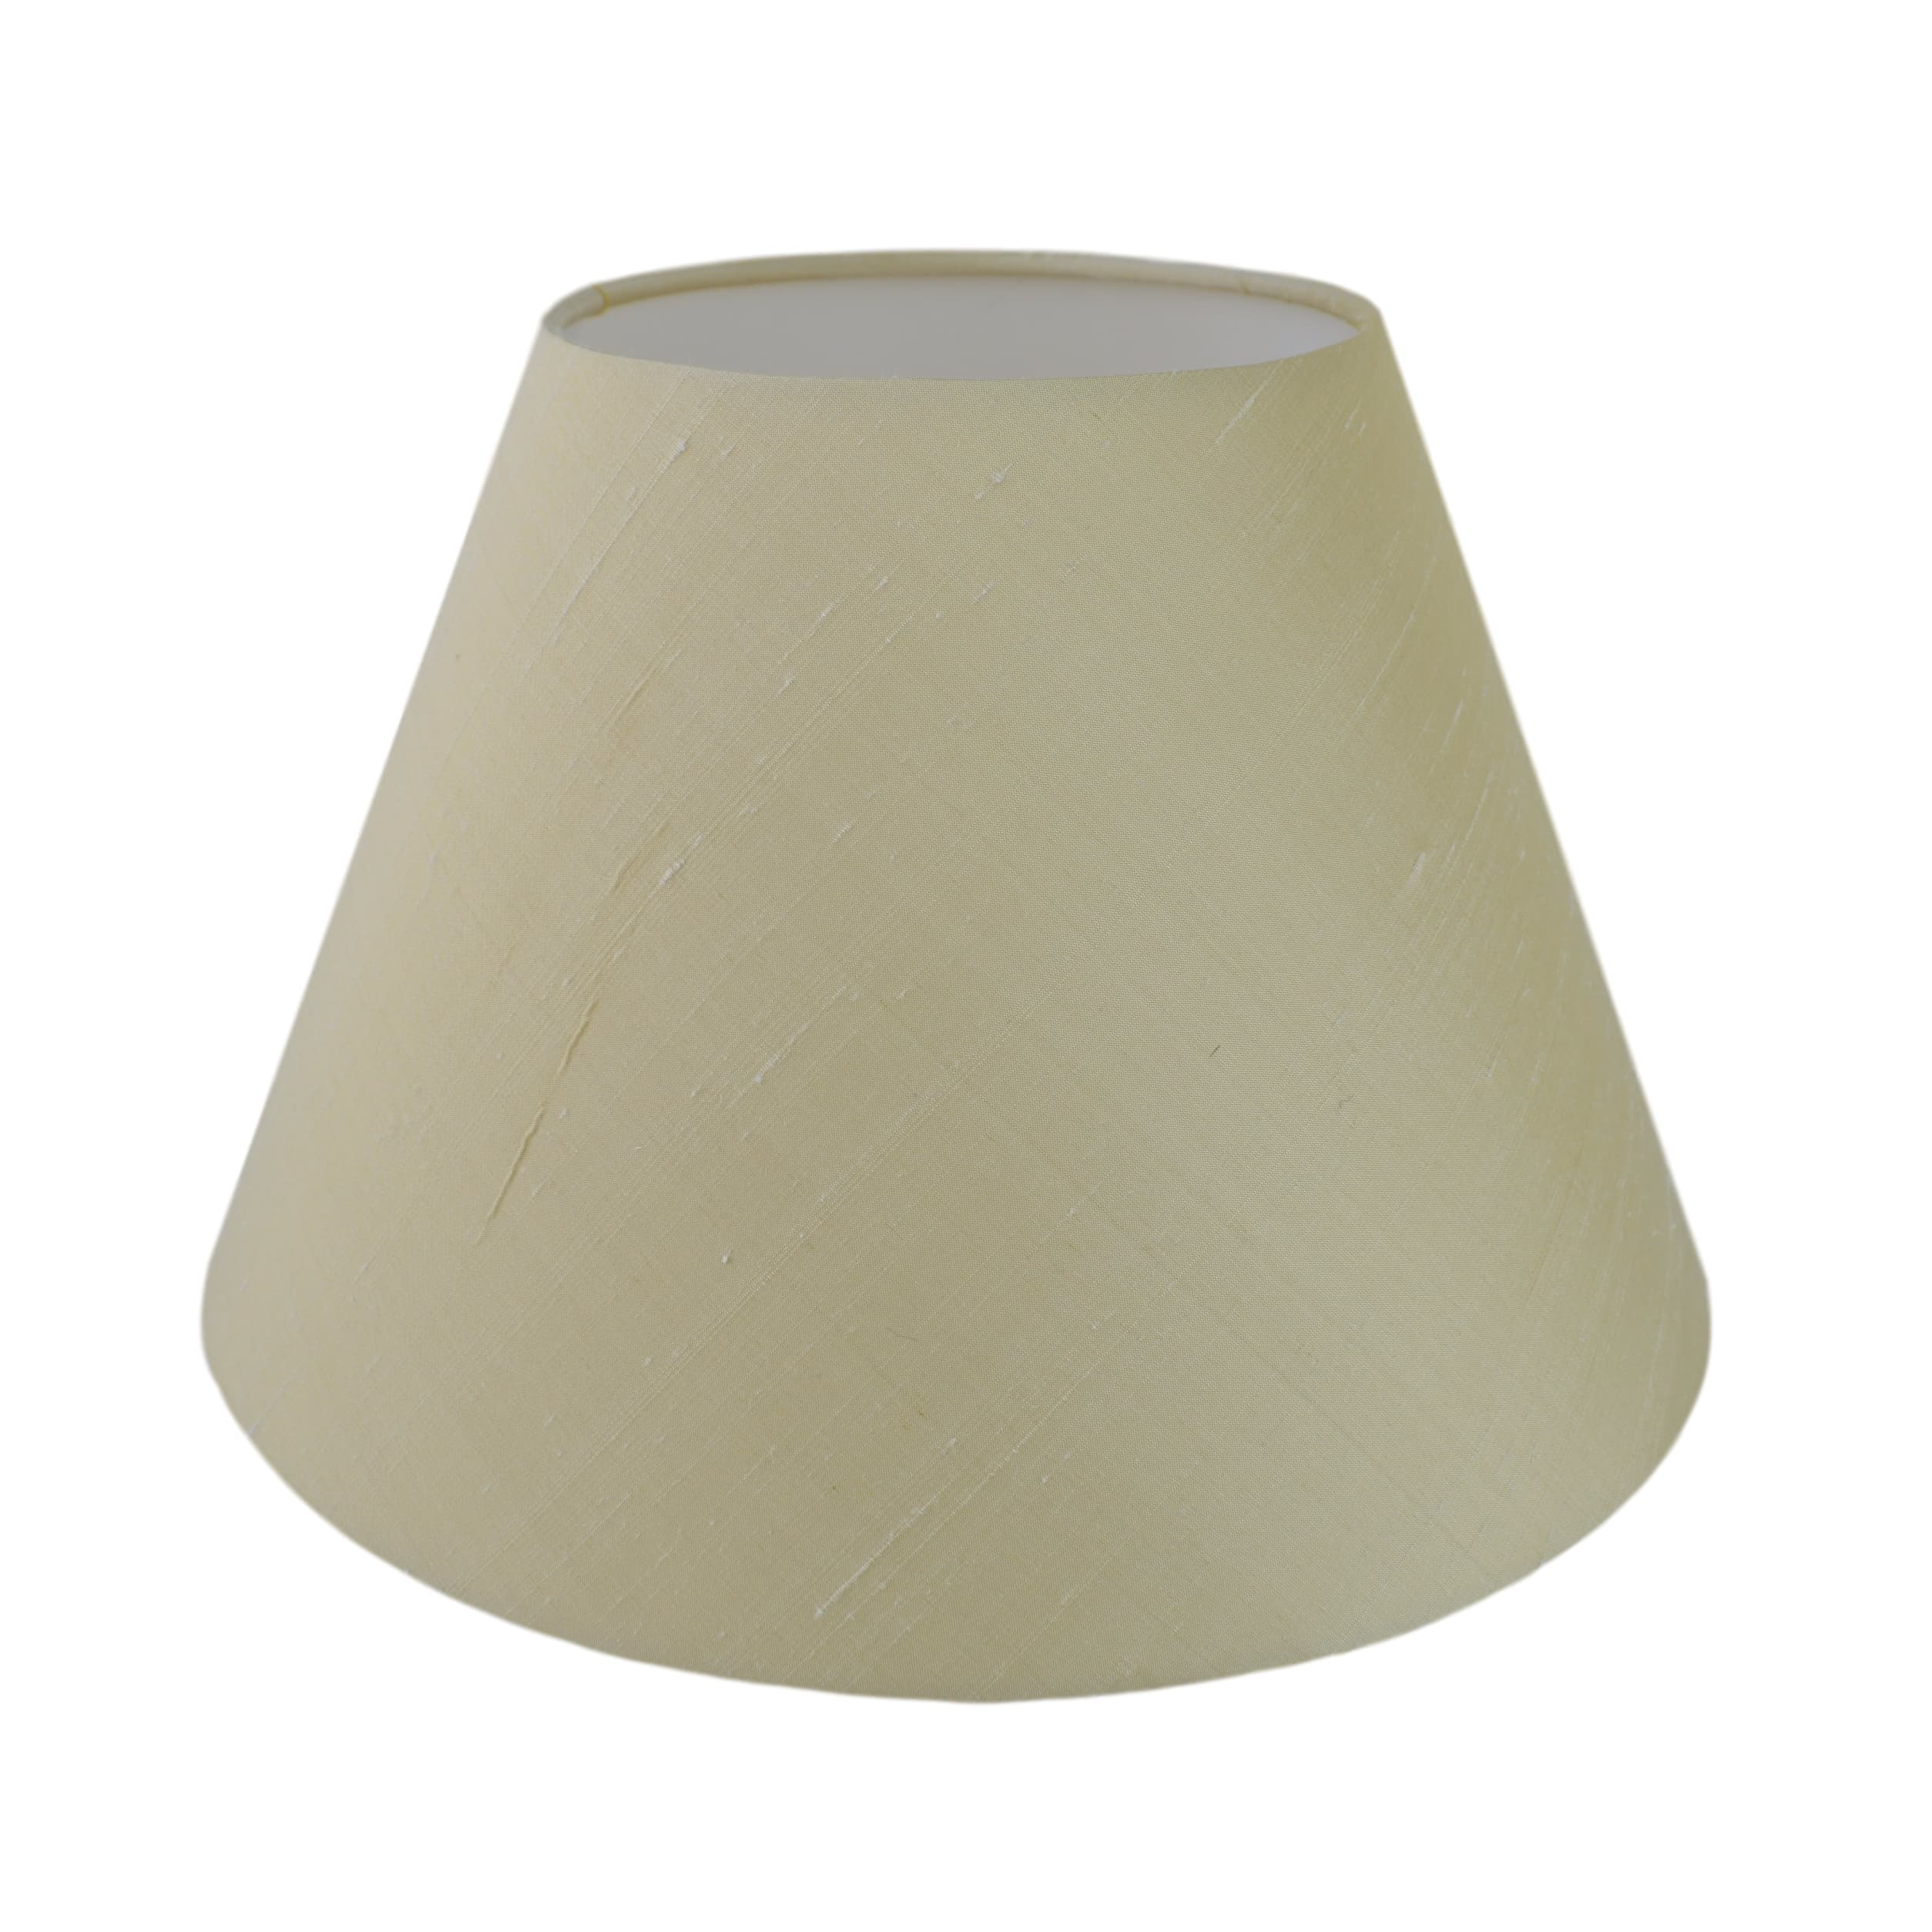 Munro and Kerr customers own material tapered empire lampshade